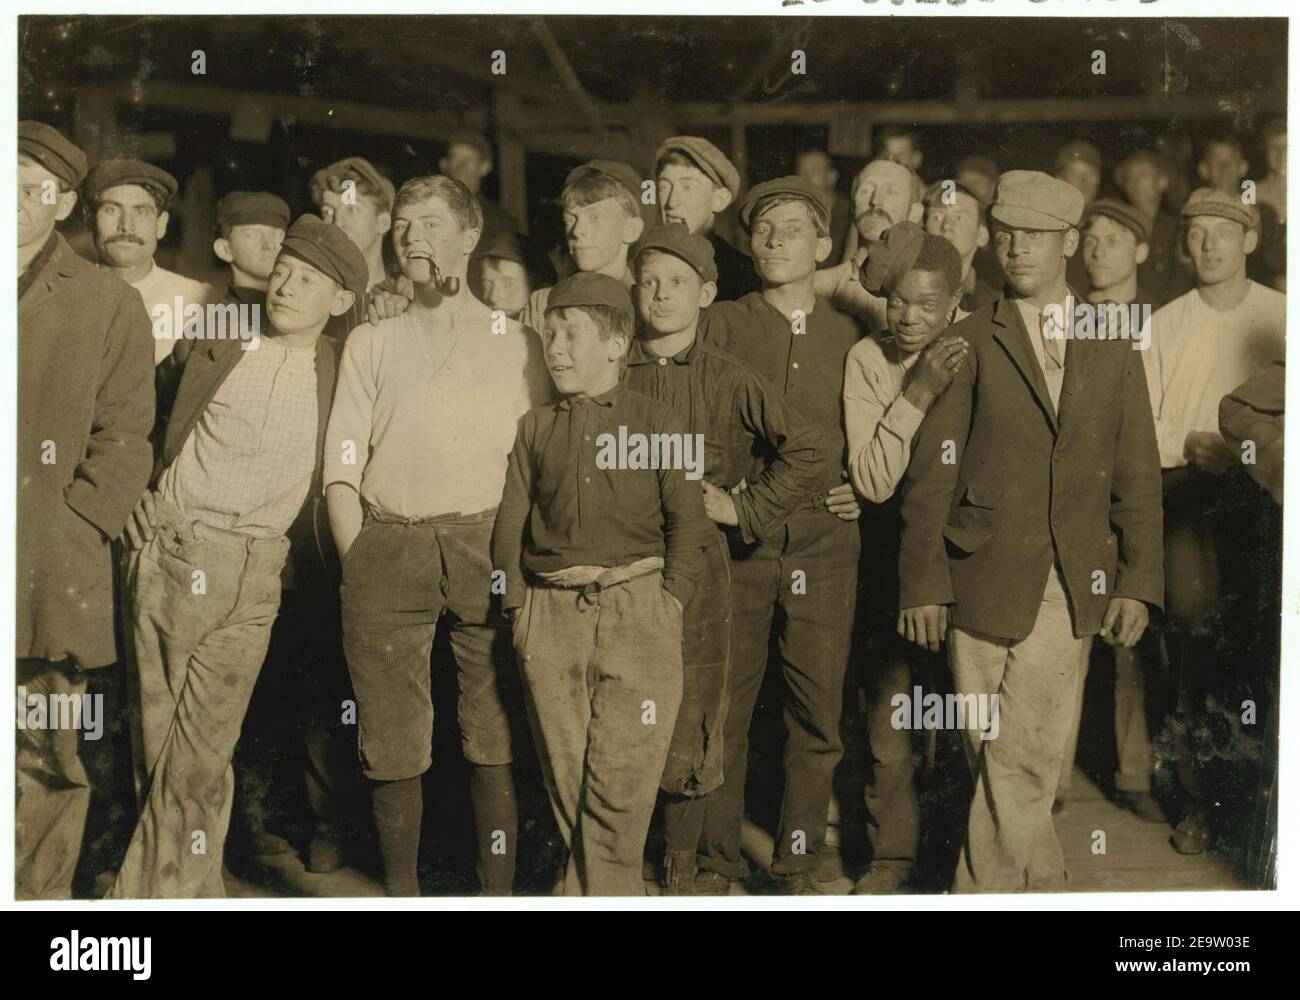 Name- A few of the workers on night shift, Cumberland Glass (Works), Bridgeton, N.J. One boy is 13 years old. Nov. 15, 1909. Stock Photo